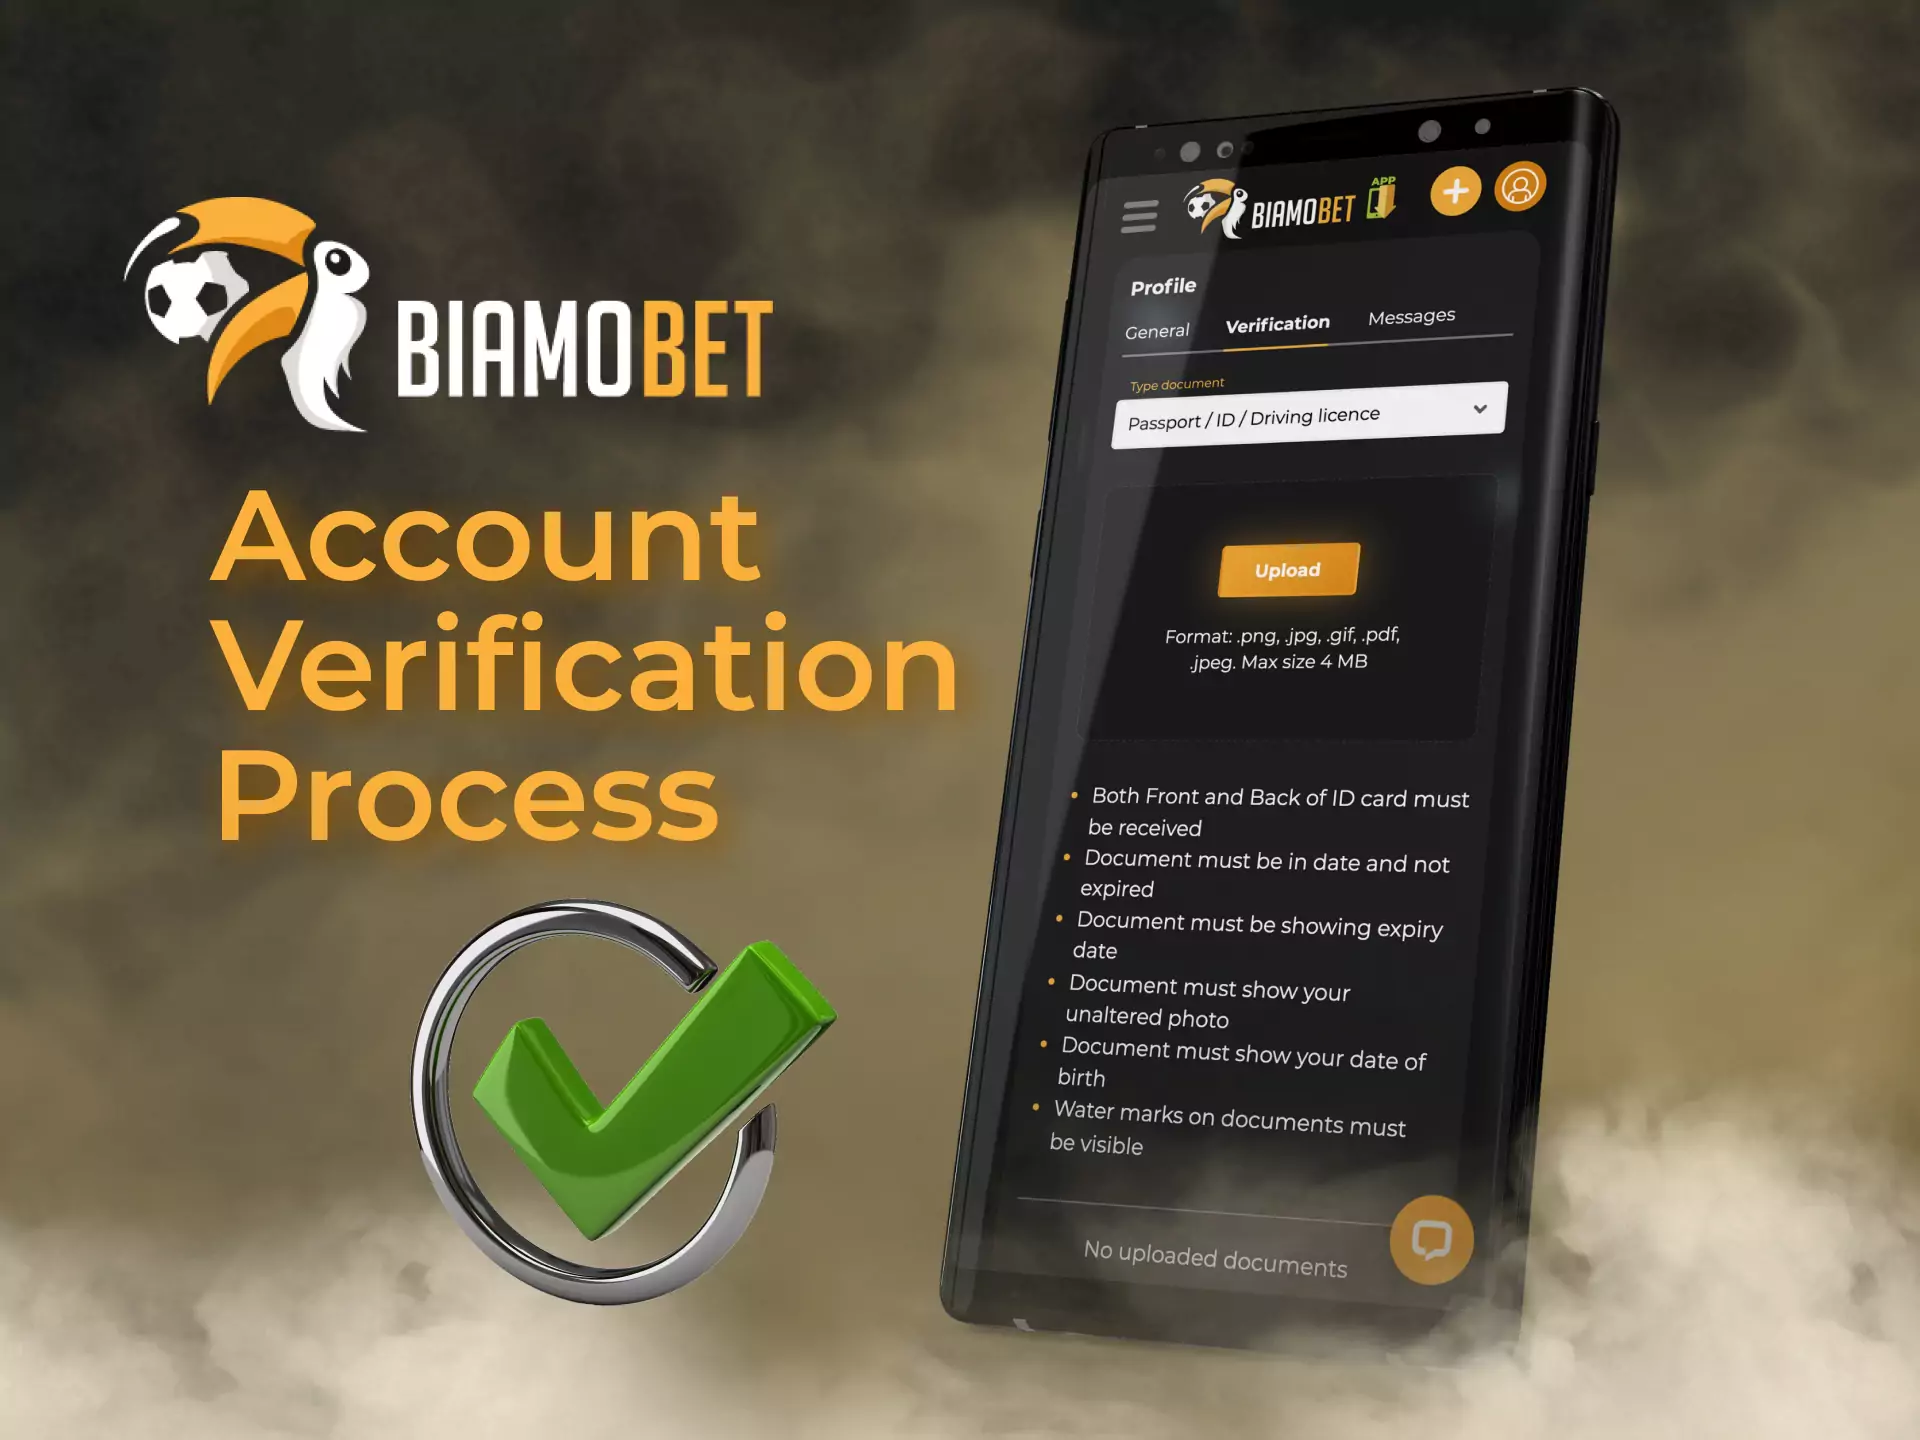 After you created an account, verify it with your documents.